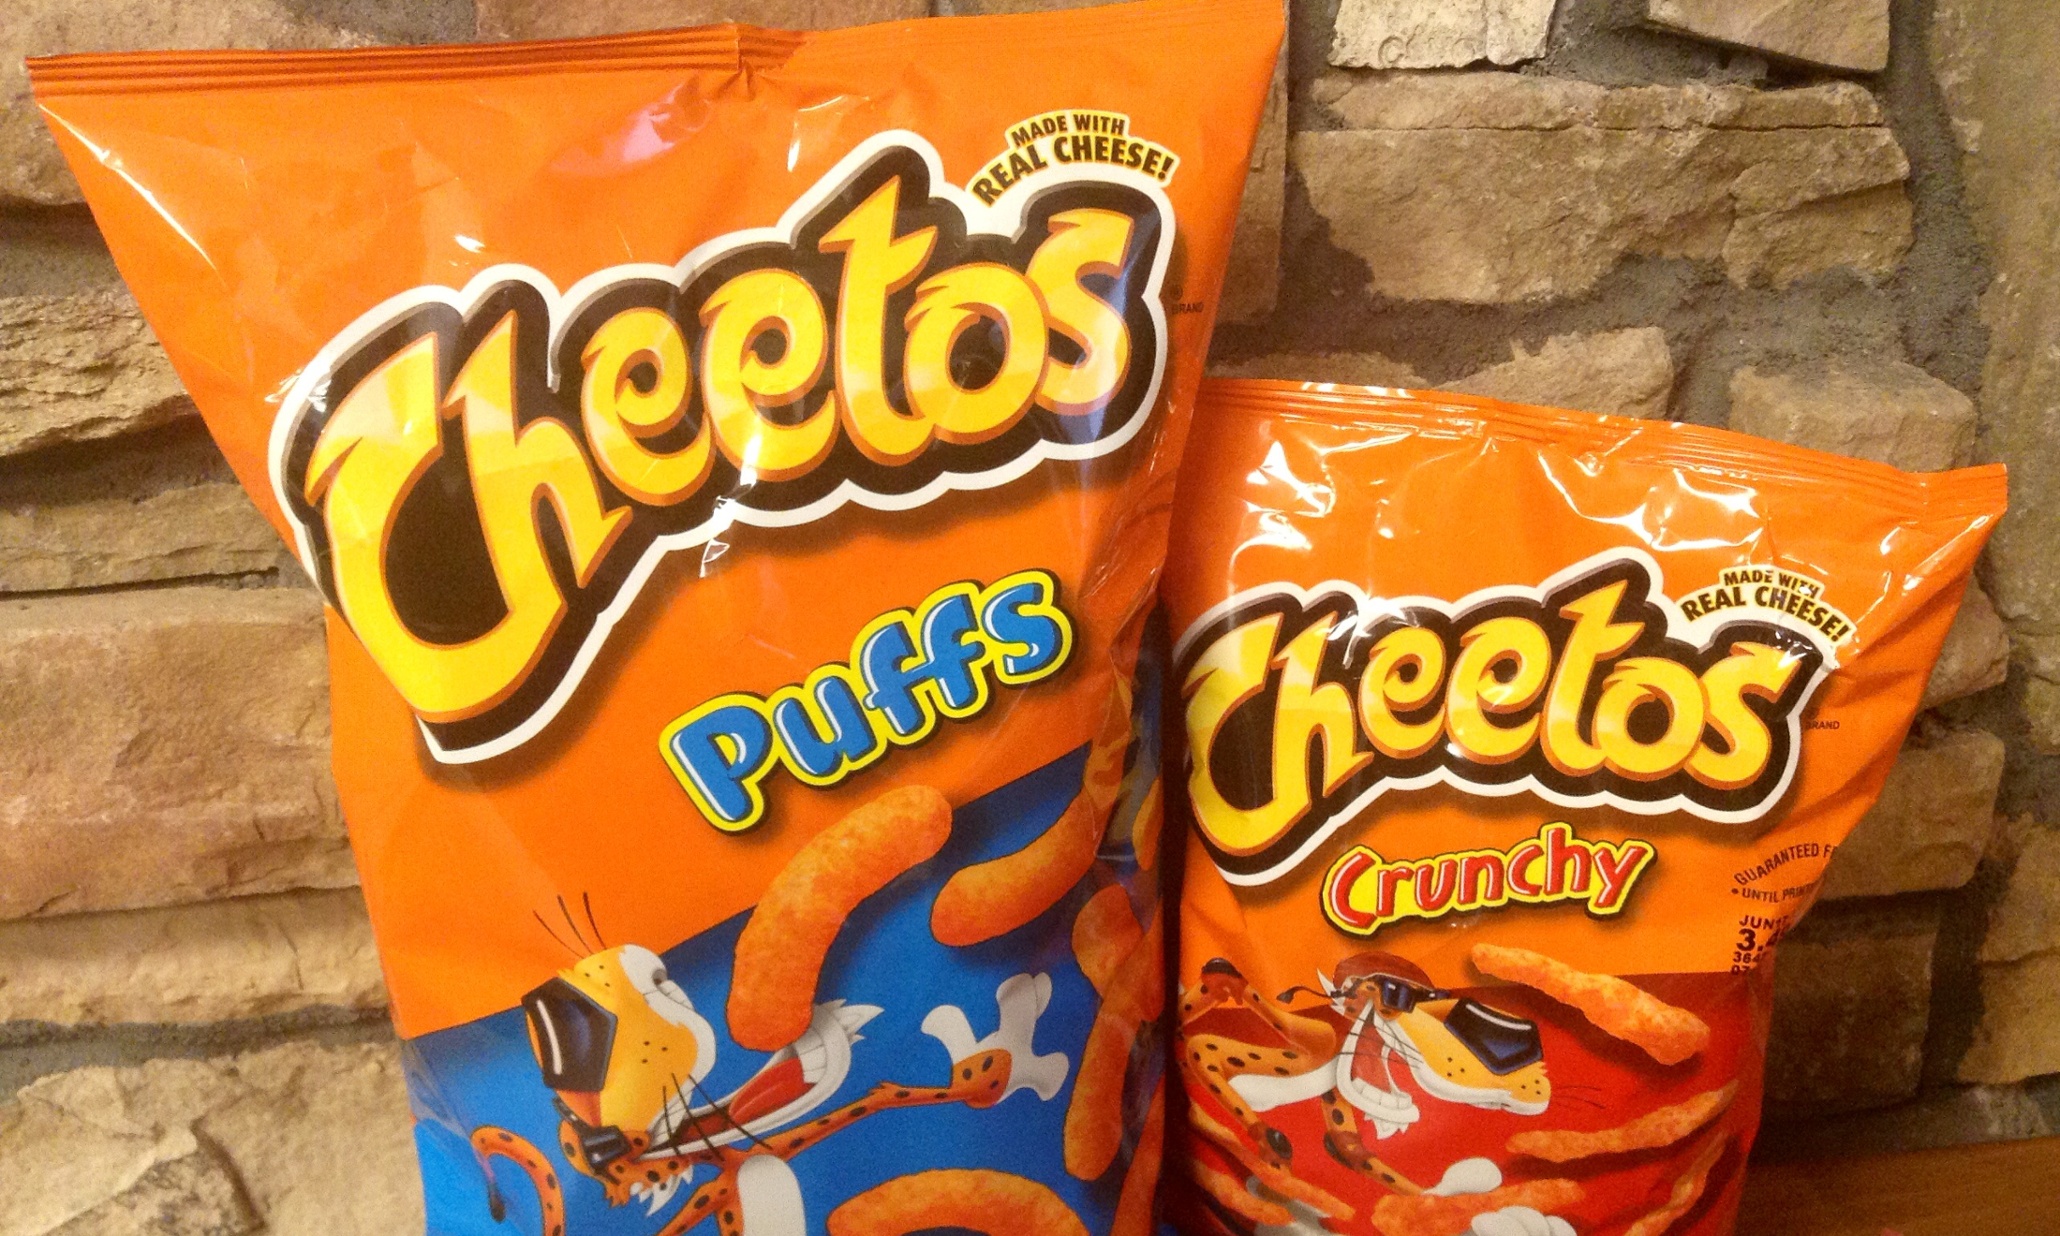 No artificial ingredients: what it takes to get synthetics out of Coke and Cheetos...